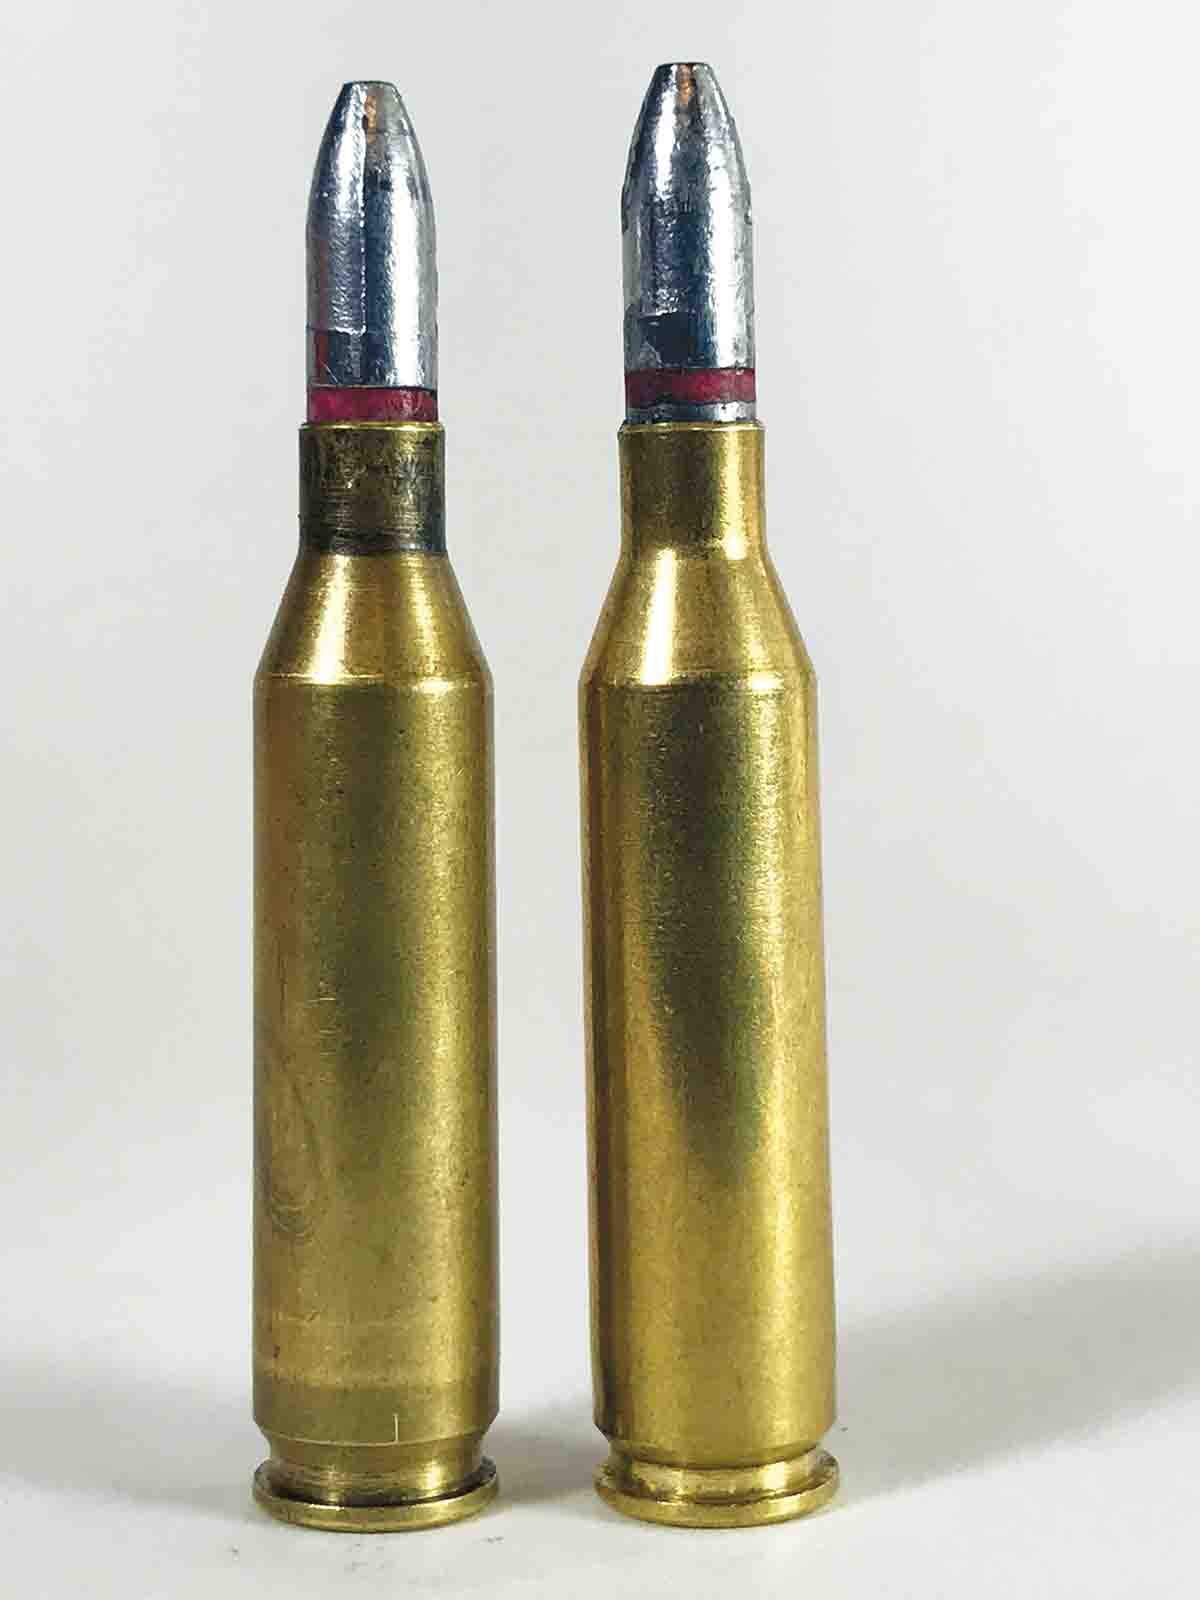 A small adjustment in cast bullet seating depth makes a world of difference in accuracy. The .243 Winchester cartridge (right) has an overall length of 2.686 inches that jams the bullet into the rifling of a Cooper Model 22 .243, with poor resulting accuracy. A slightly shorter cartridge length of 2.6530 inches (left) provided much better accuracy.